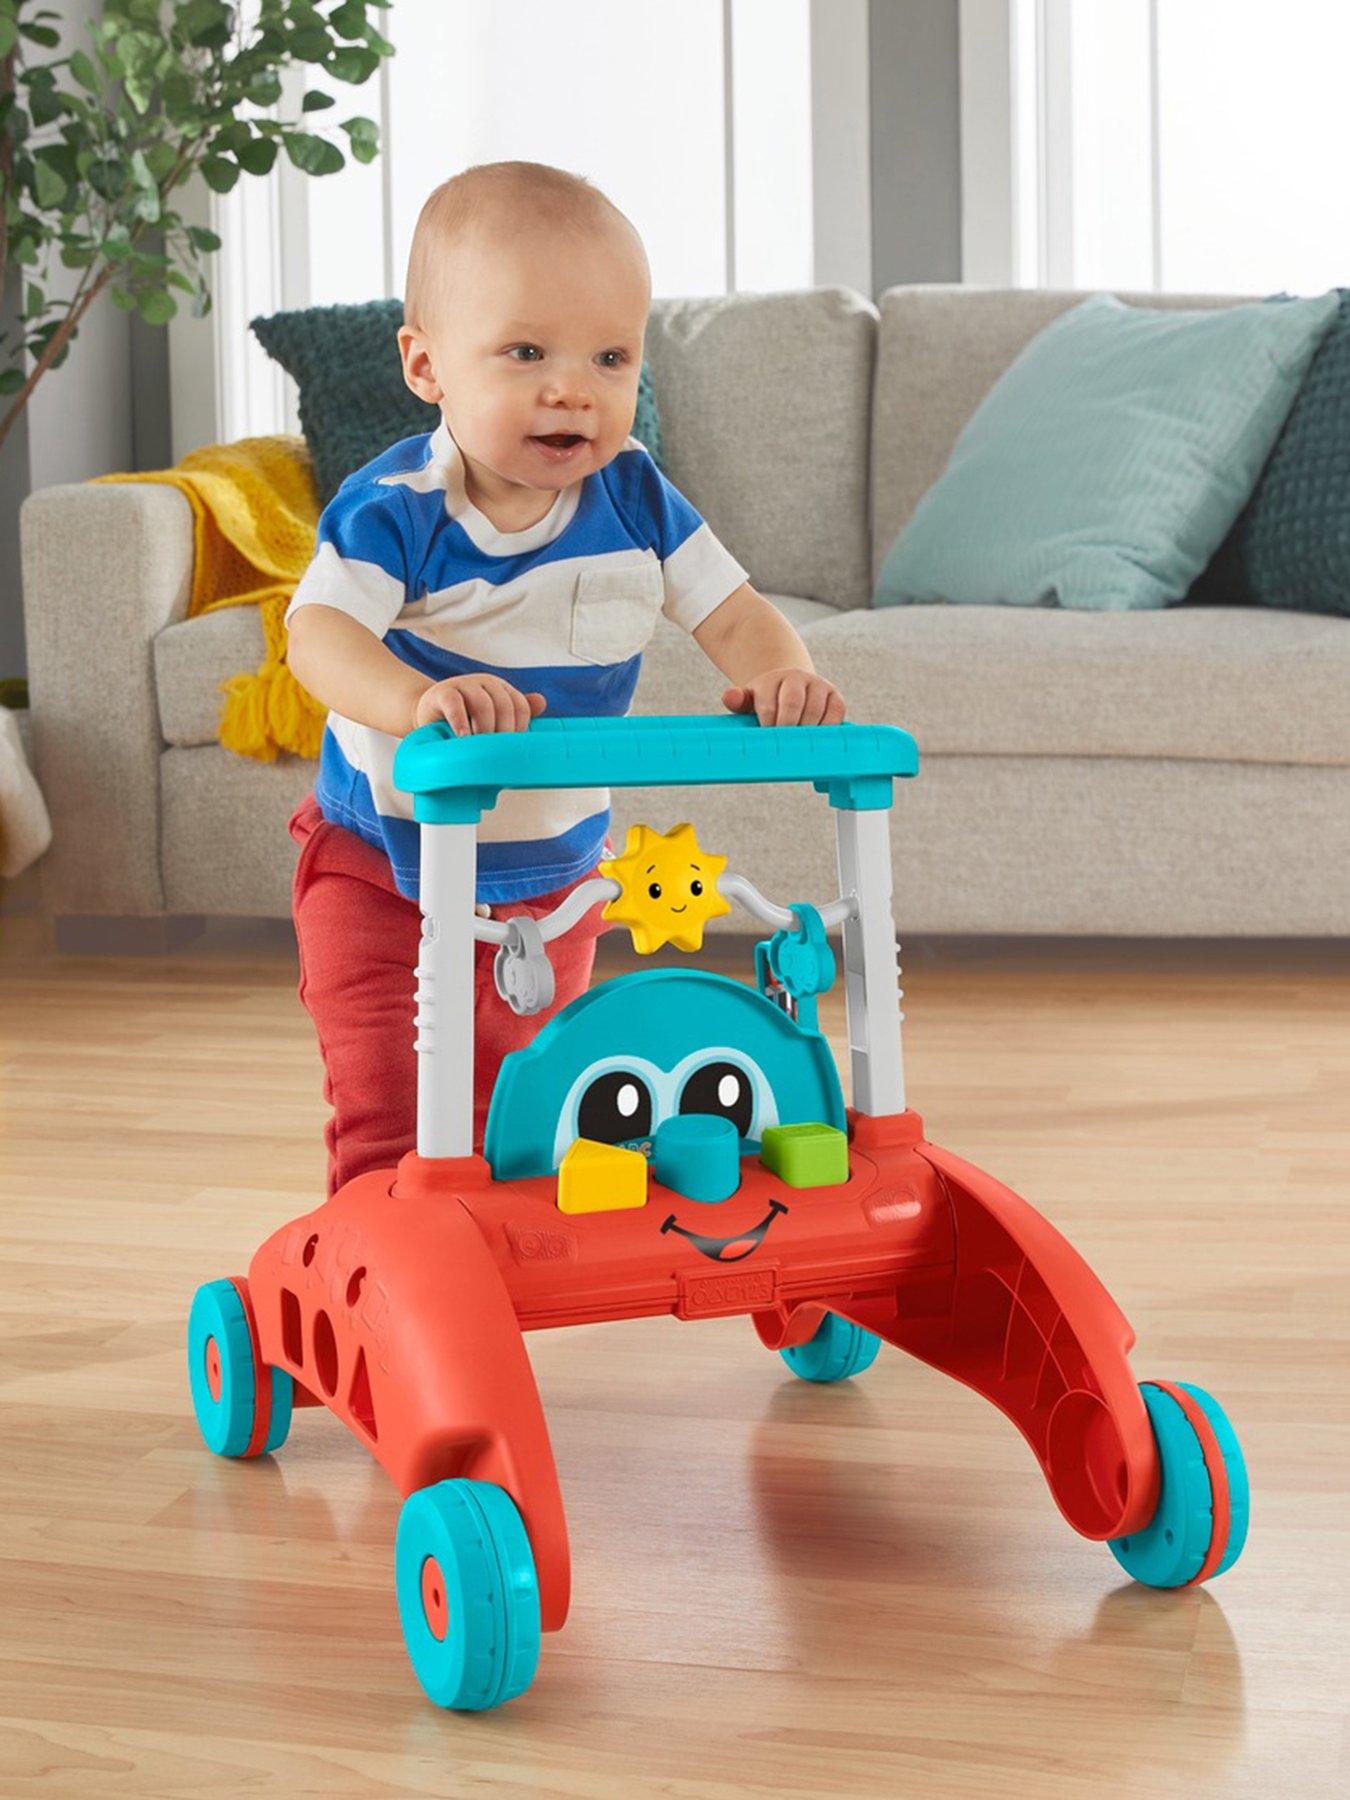 Smoby Little Baby Walker Detachable Activity Play Board – Baby's First Doll  Pushchair Toy – Grows with The Child from Activity Board to Walker with